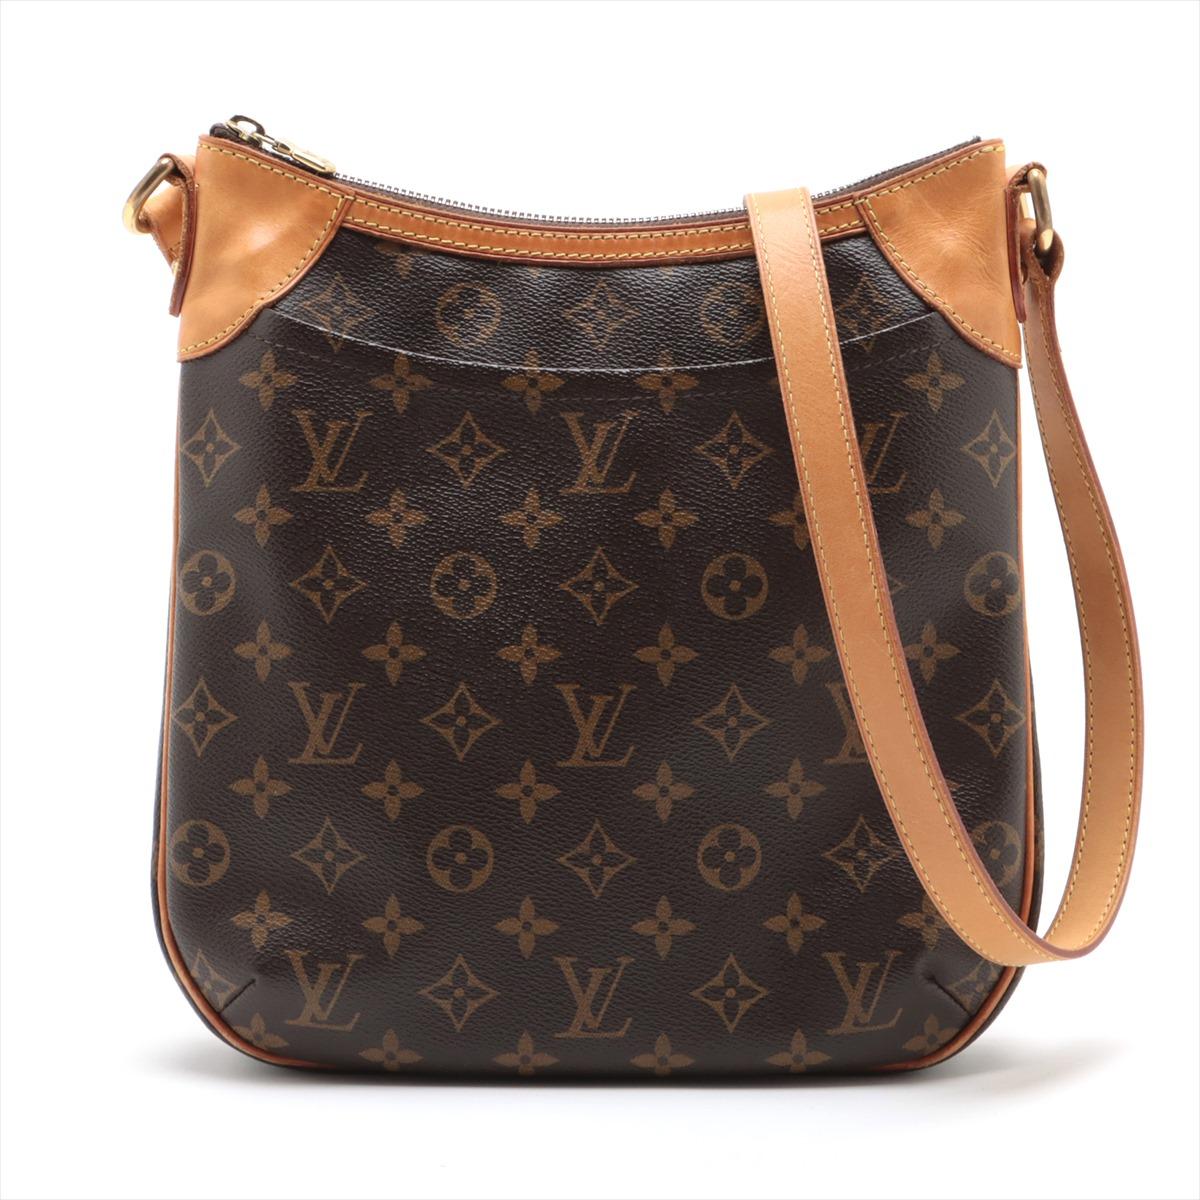 The Louis Vuitton Monogram Odeon PM is a classic and sophisticated crossbody bag that exudes timeless elegance. Crafted from the brand's iconic monogram canvas, the bag features the renowned LV monogram pattern, making it instantly recognizable as a